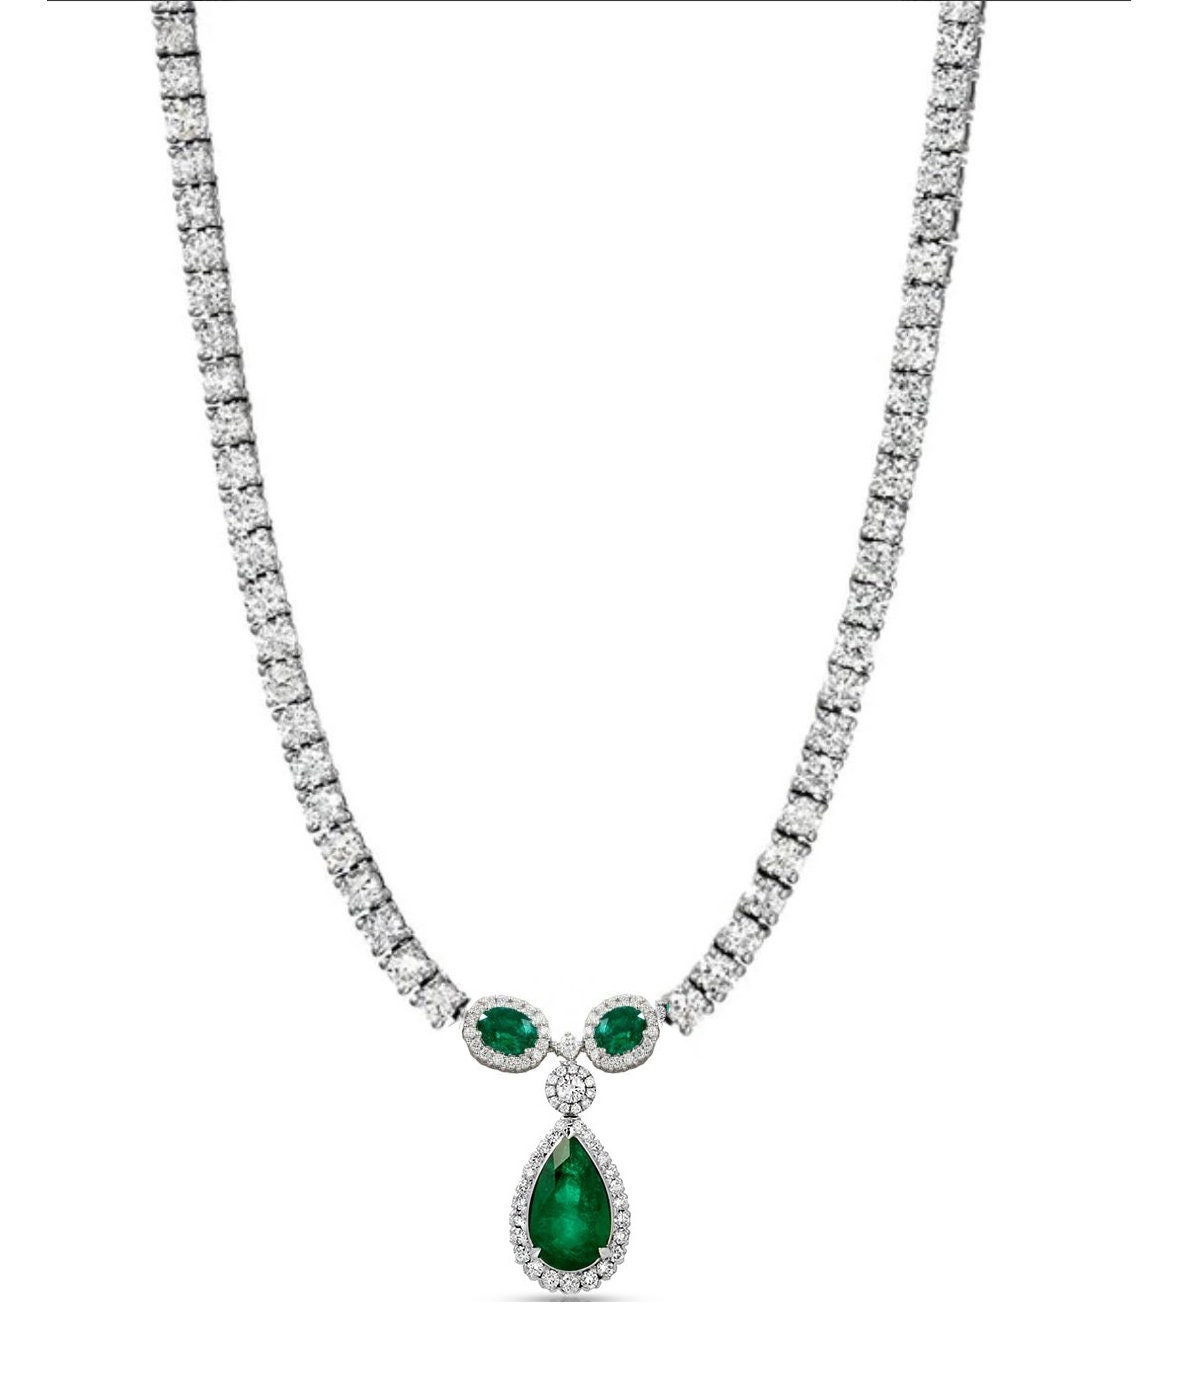 Emerald Necklace, Sterling Silver Emerald Necklace, Birthday Gift For Her, Jewelry, Wedding Necklace